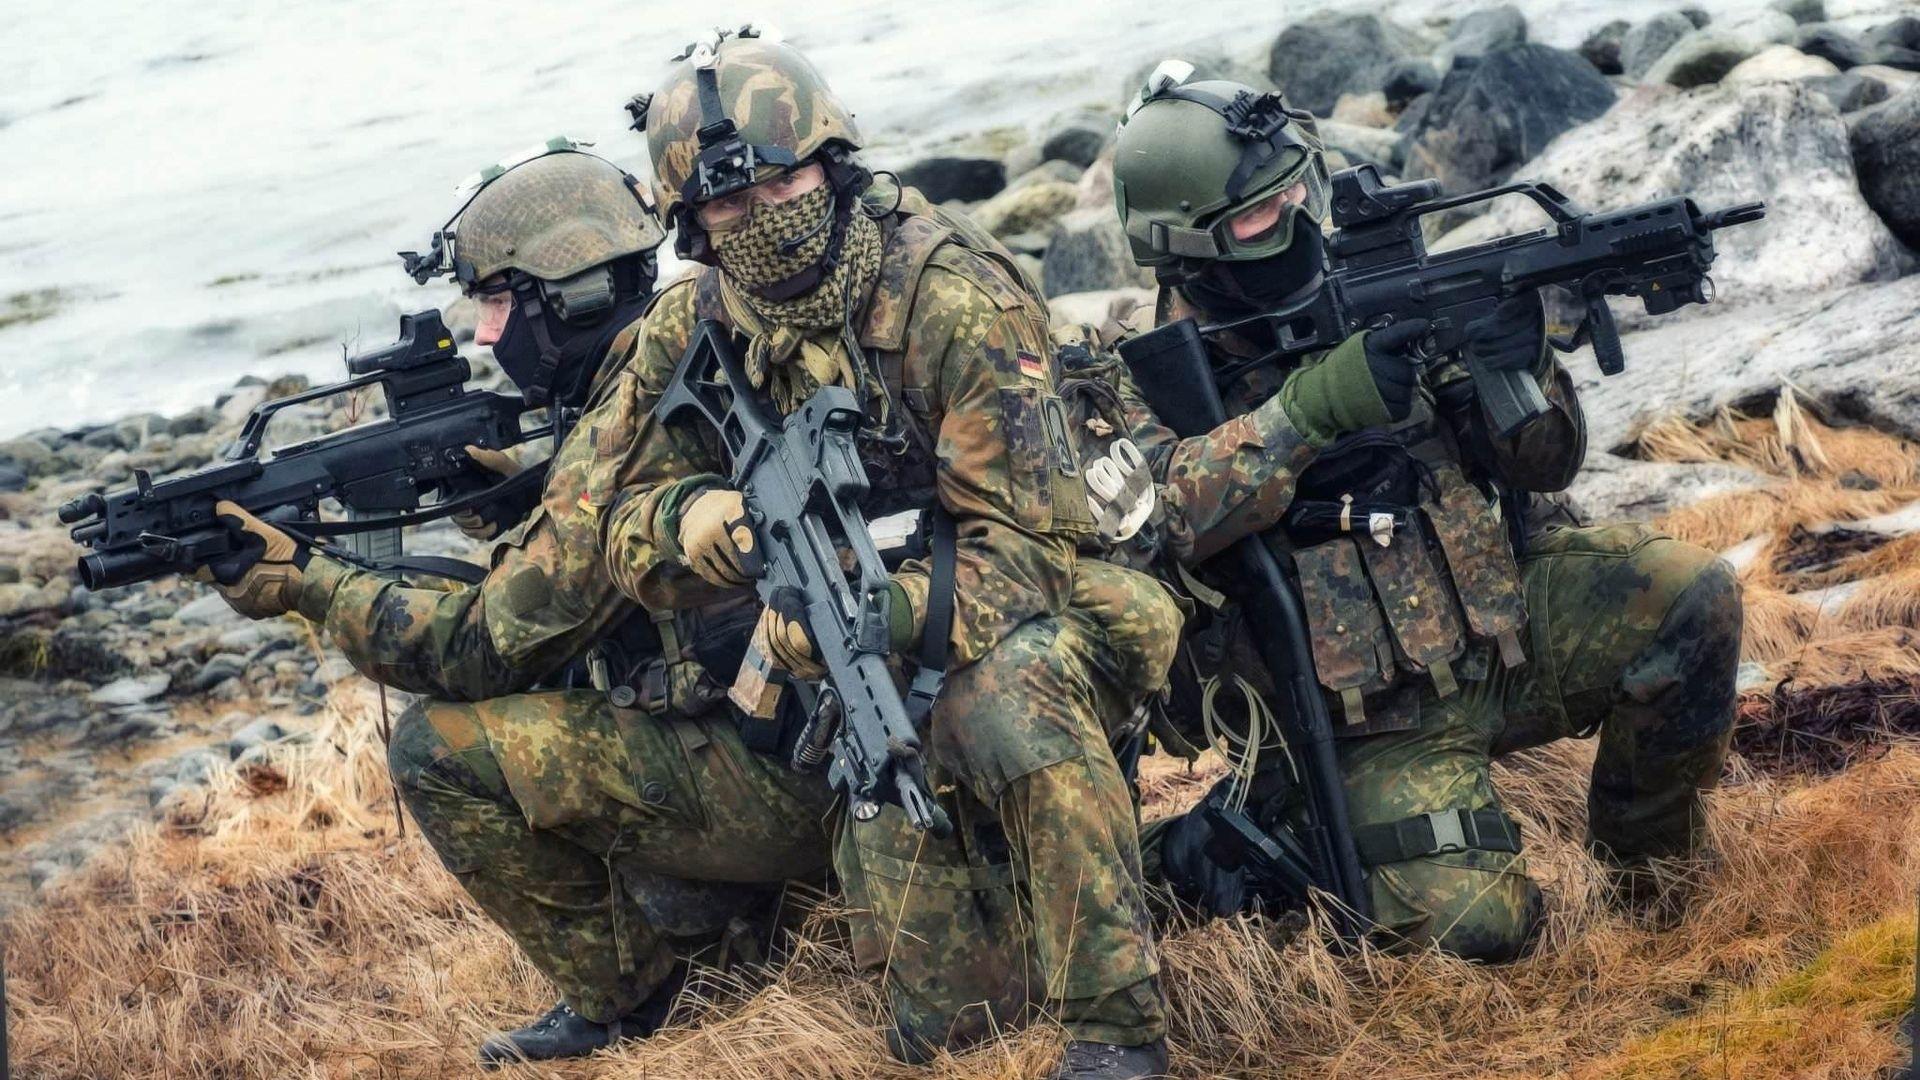 outfit, the bundeswehr, germany, soldiers, hk g36